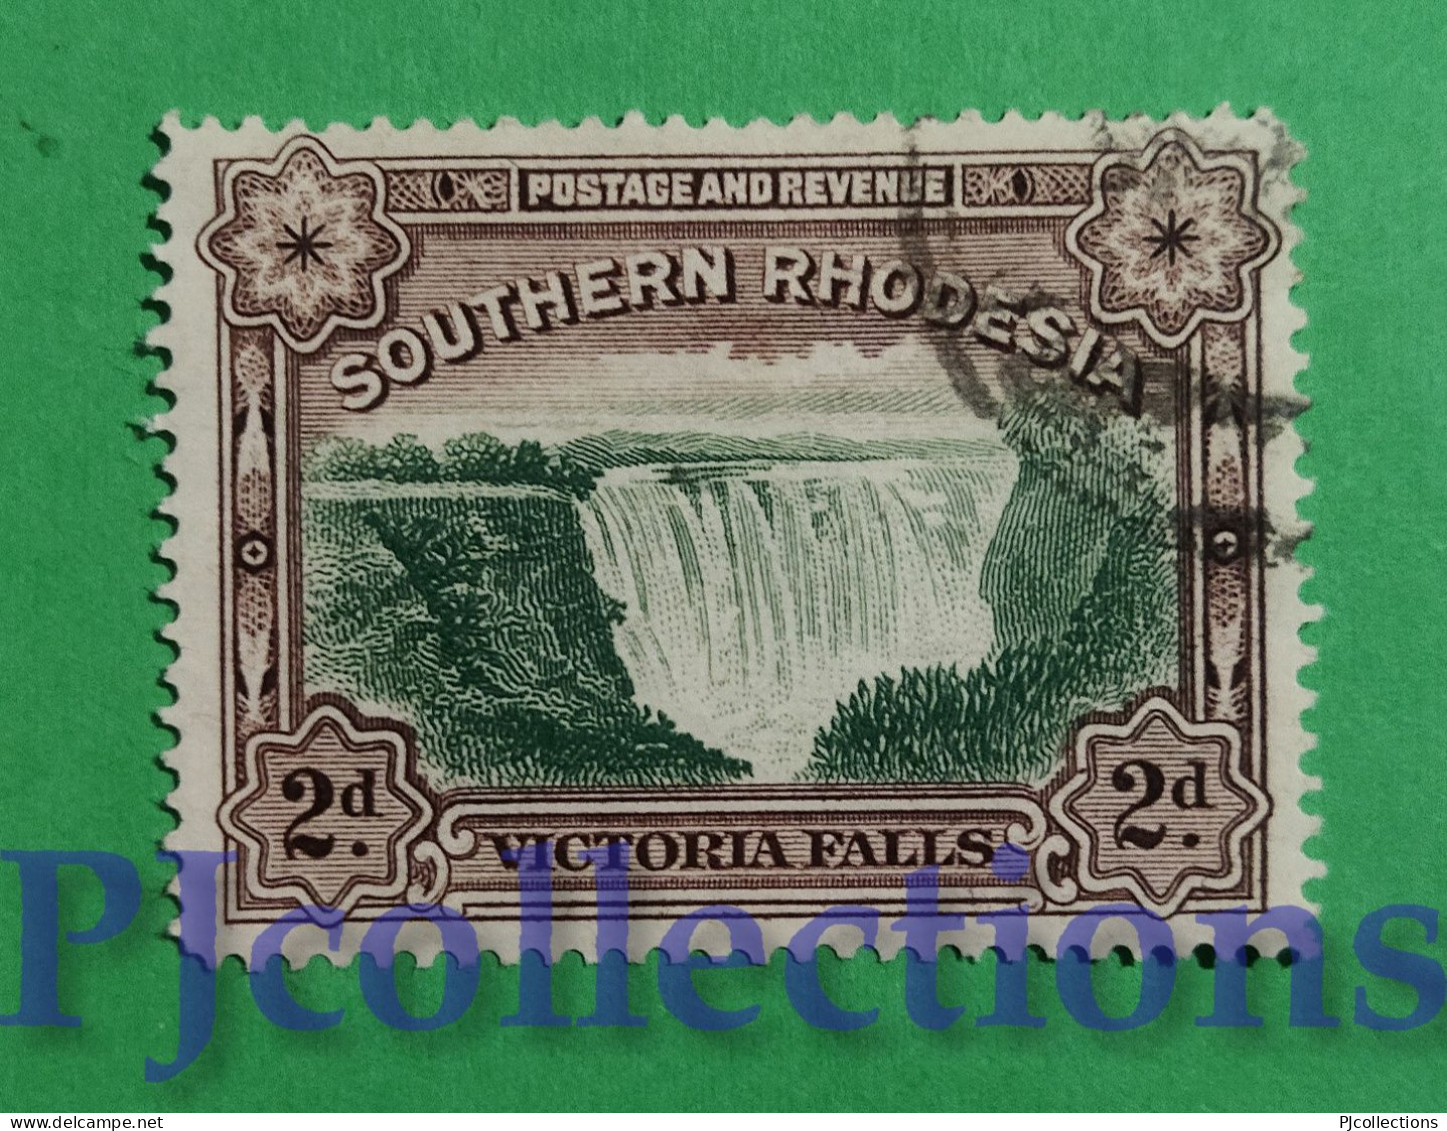 S774- SOUTHERN RHODESIA 1935 VICTORIA FALLS 2d USATO - USED - Southern Rhodesia (...-1964)